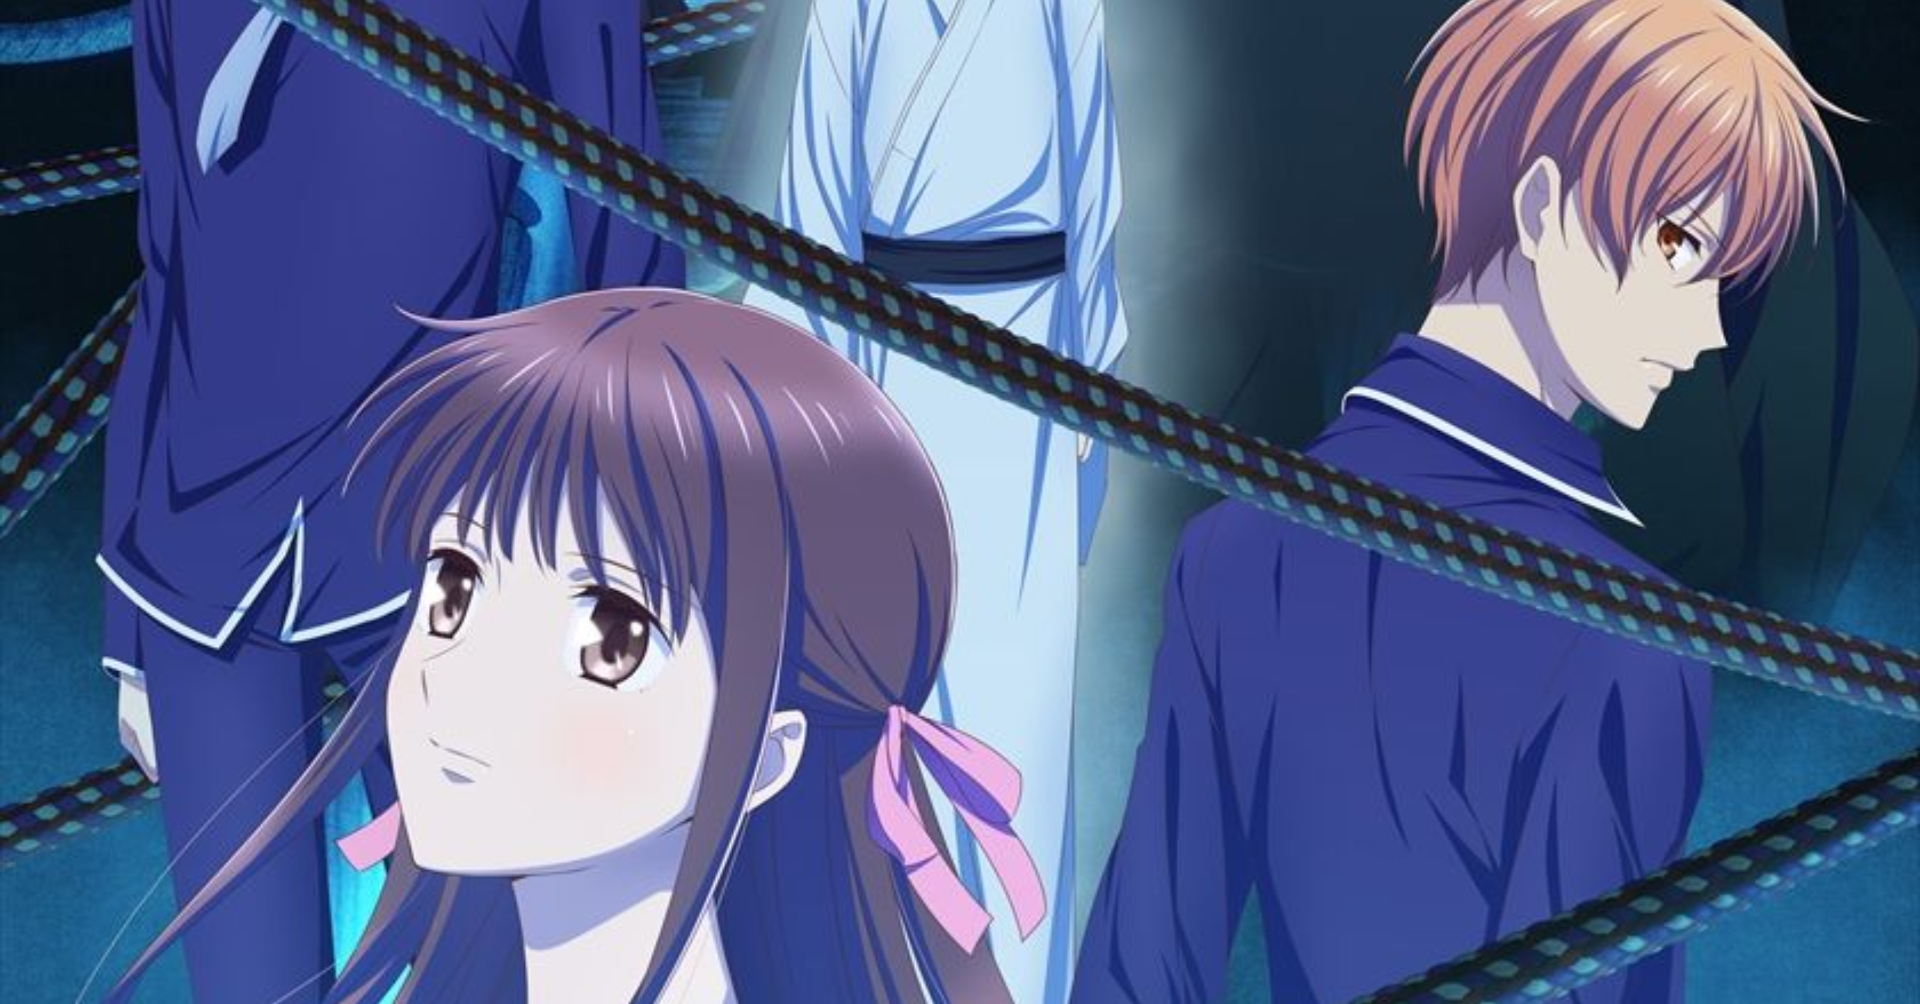 Fruits Basket The Final opening ending songs